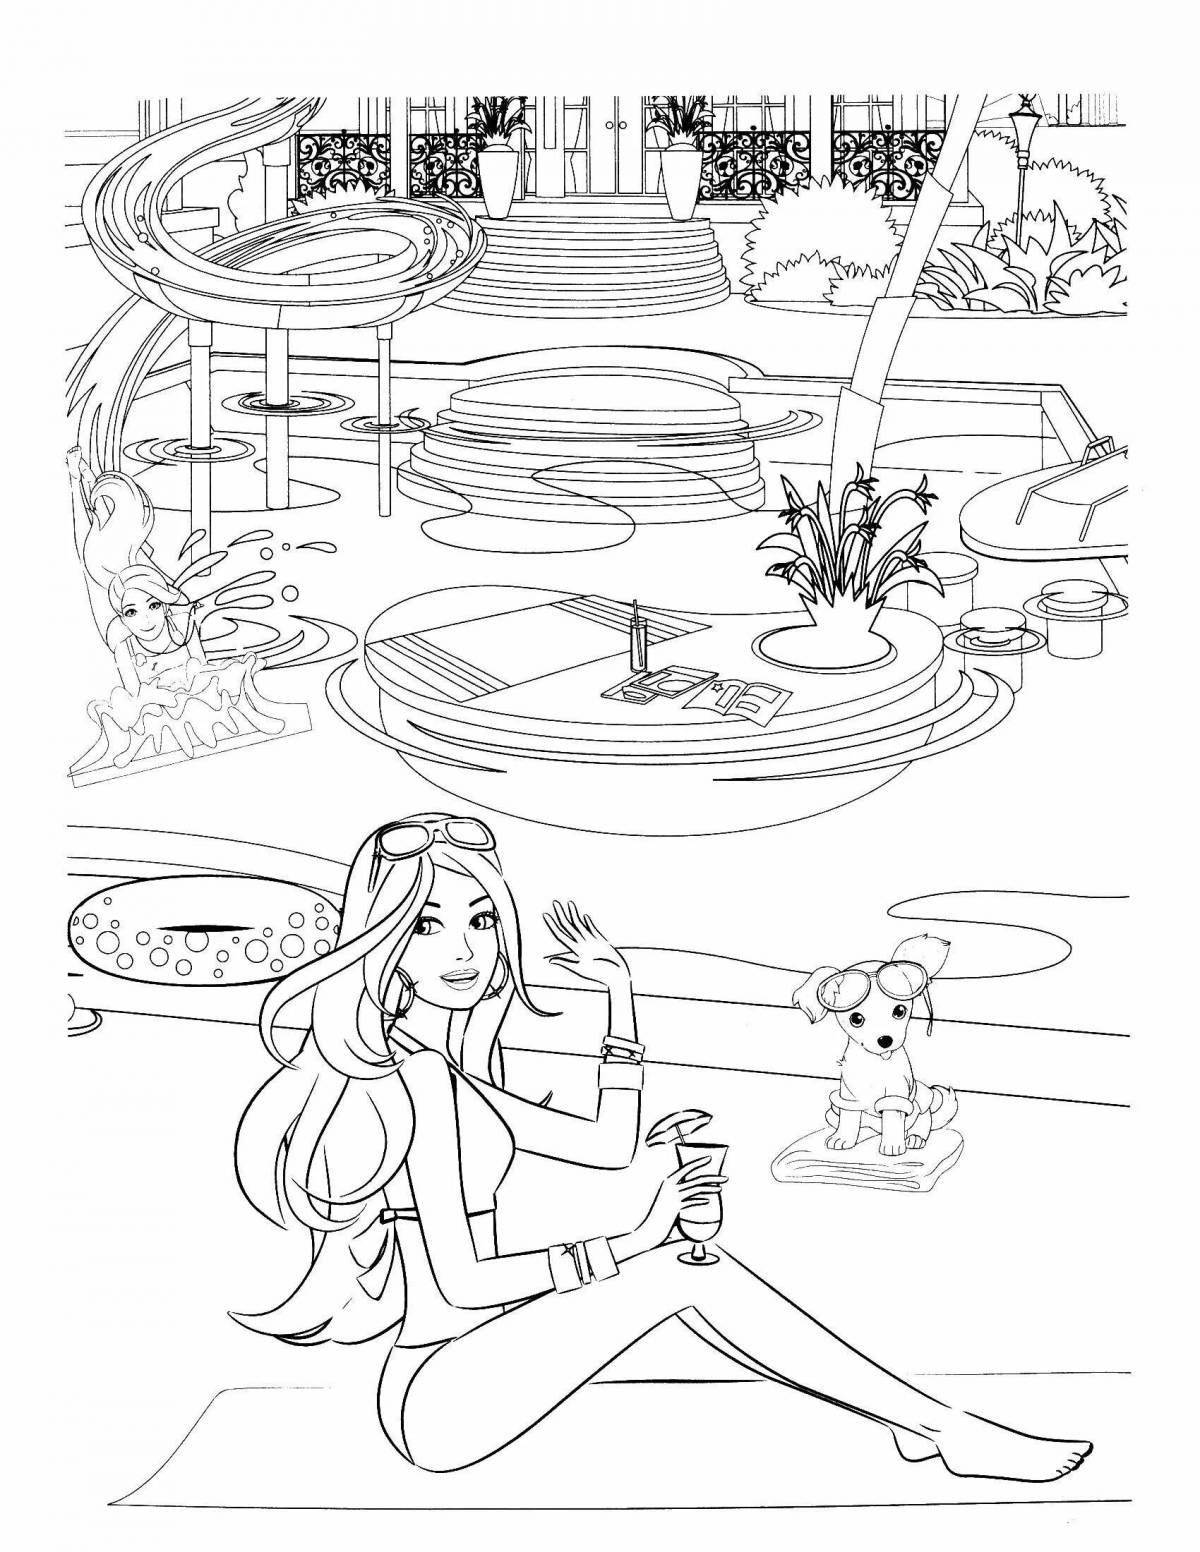 Fancy barbie in the sea coloring page